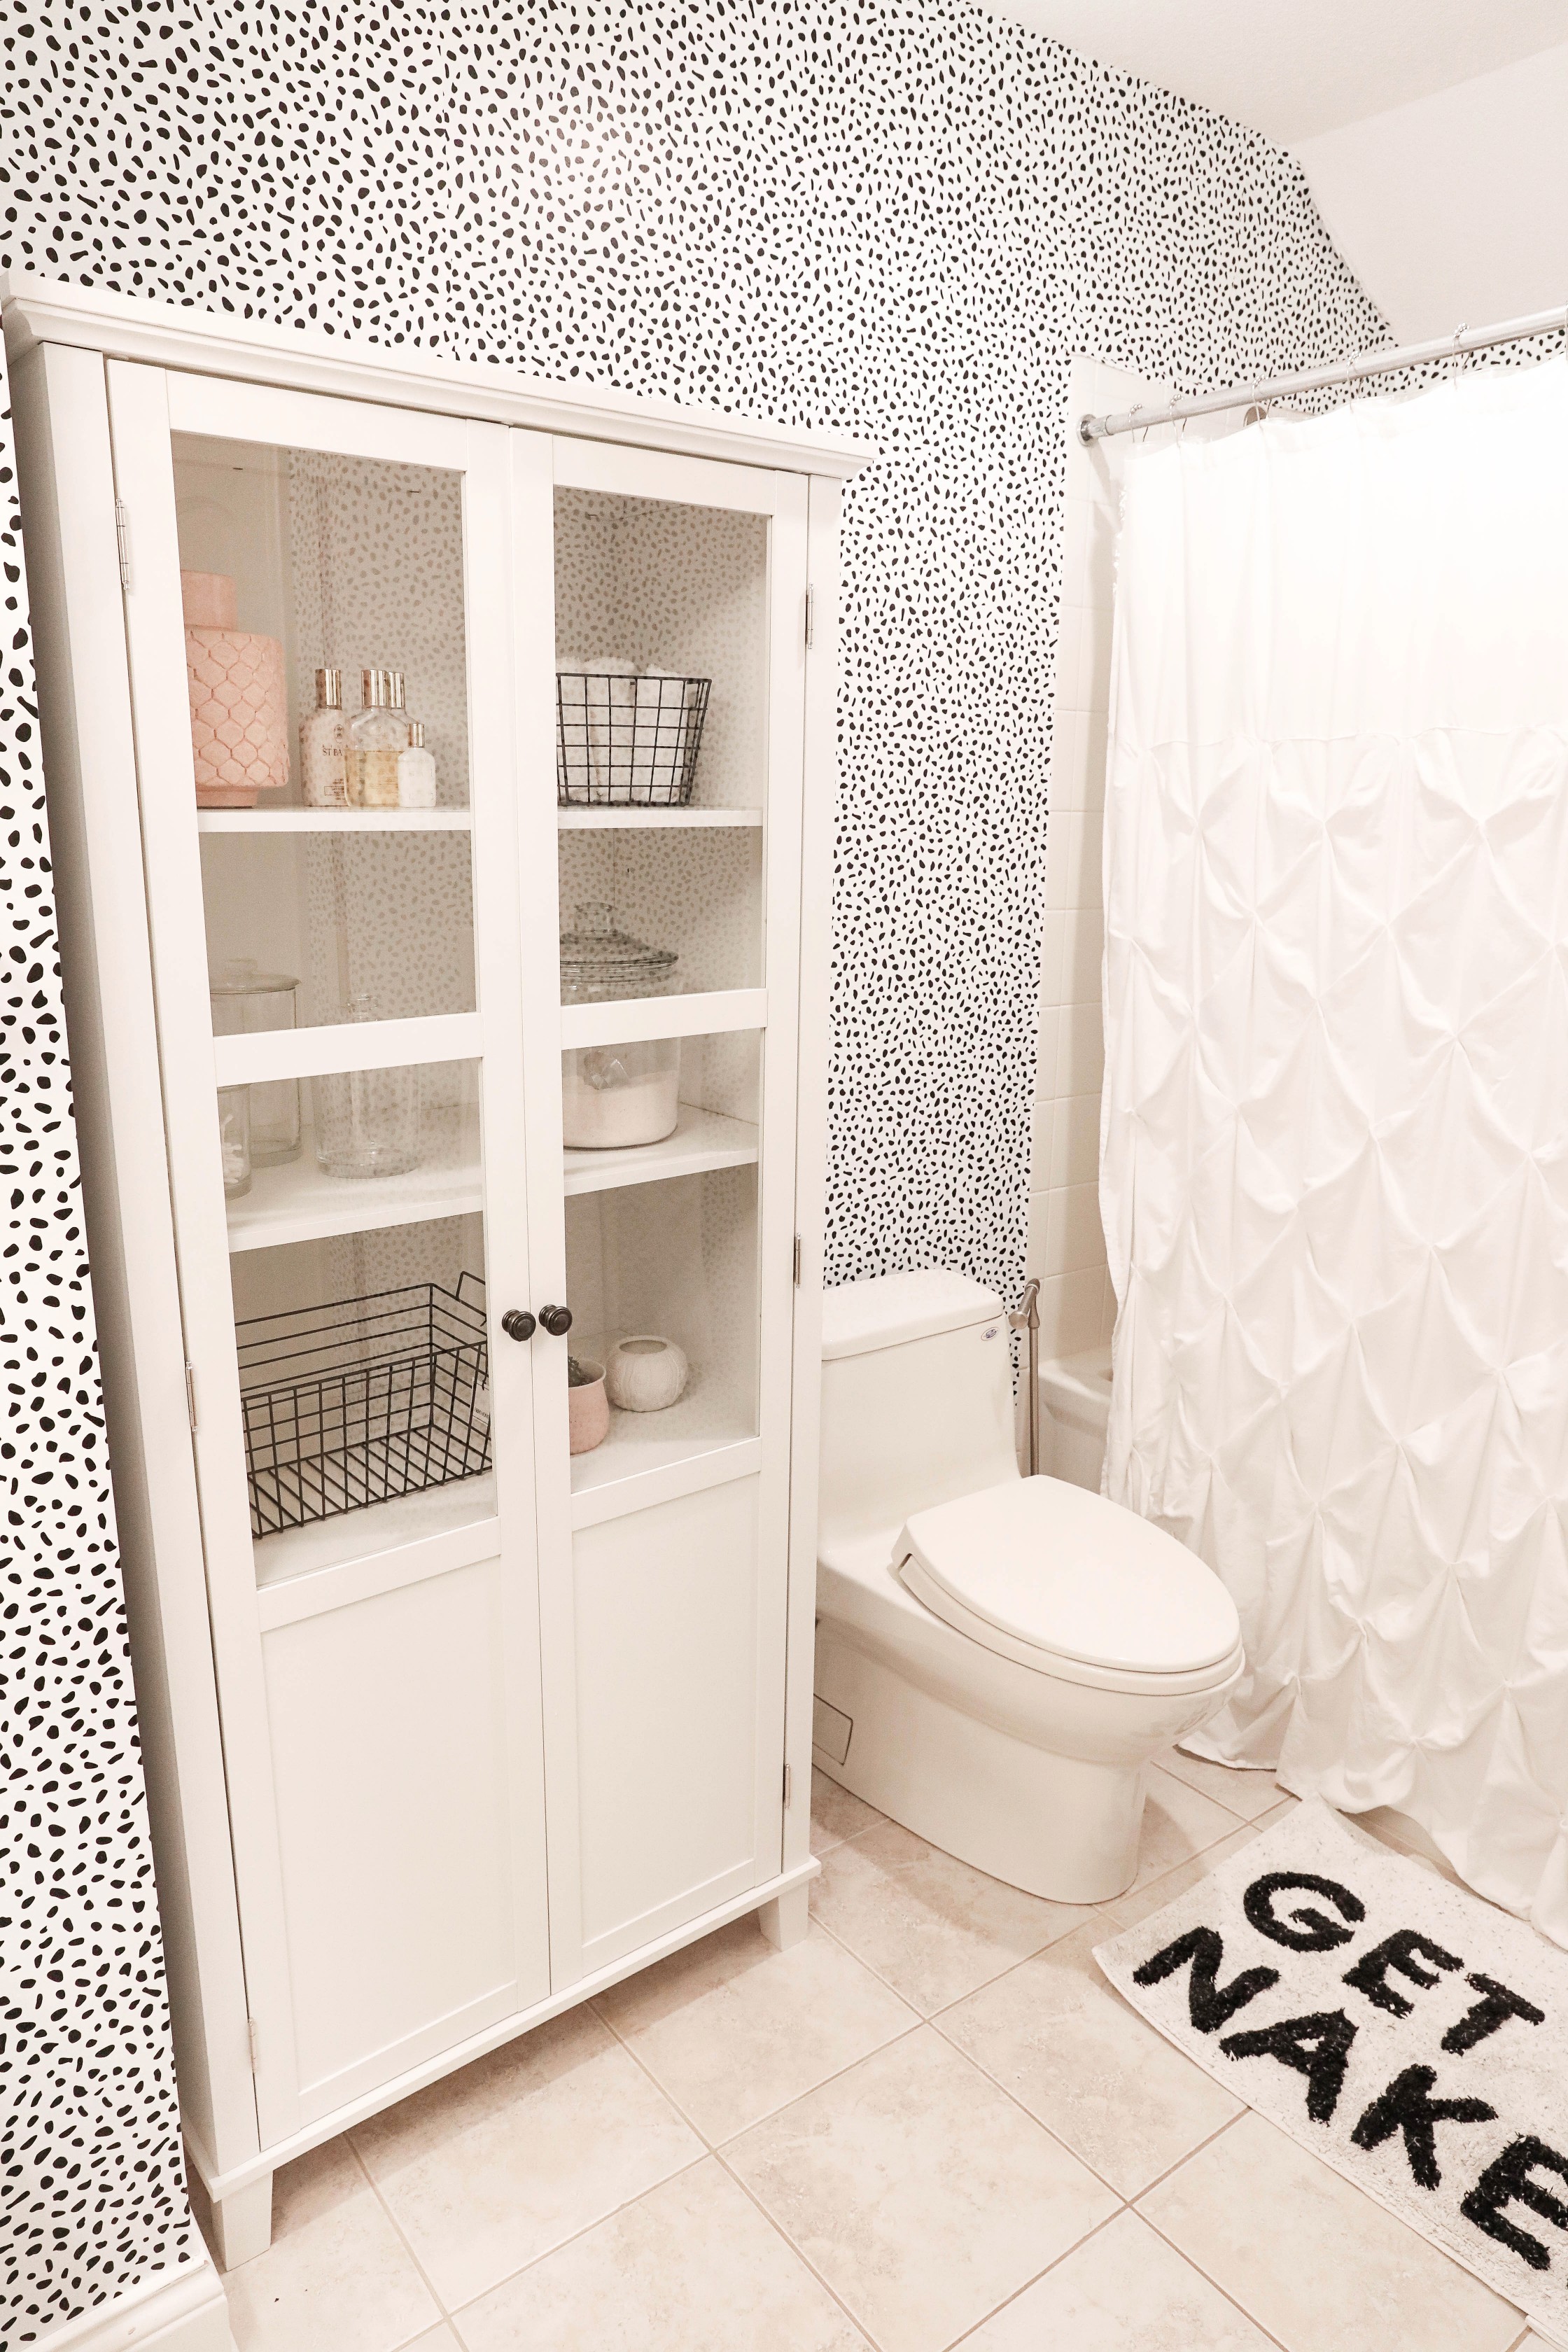 Bathroom transformation! The before photo of this bathroom are horrible, such an ugly blue color! I switched it up with some cute black and white Dalmatian wallpaper! This wallpaper is completely temporary and removable which makes it great for renting! Such a cute interior design post! Cutest black and white bathroom! Details on lifestyle and fashion blog daily dose of charm by lauren lindmark